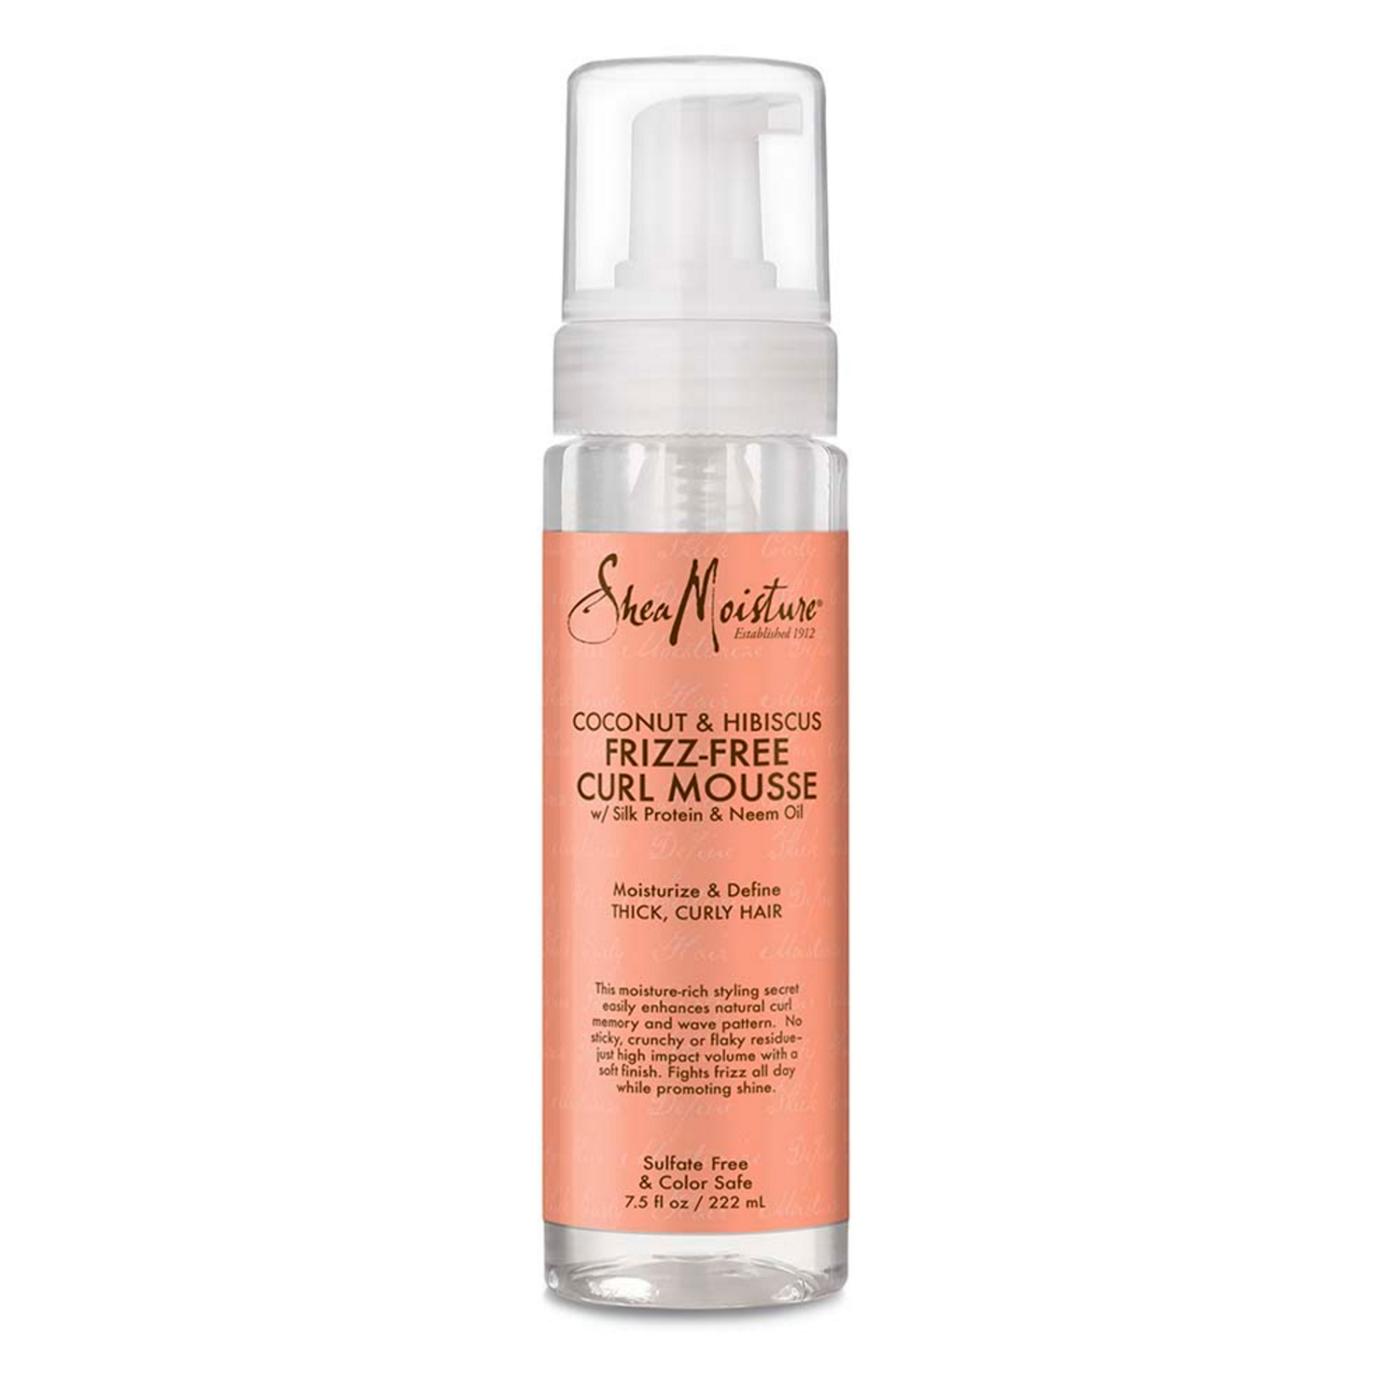 SheaMoisture Coconut & Hibiscus Frizz-Free Curl Mousse; image 1 of 11